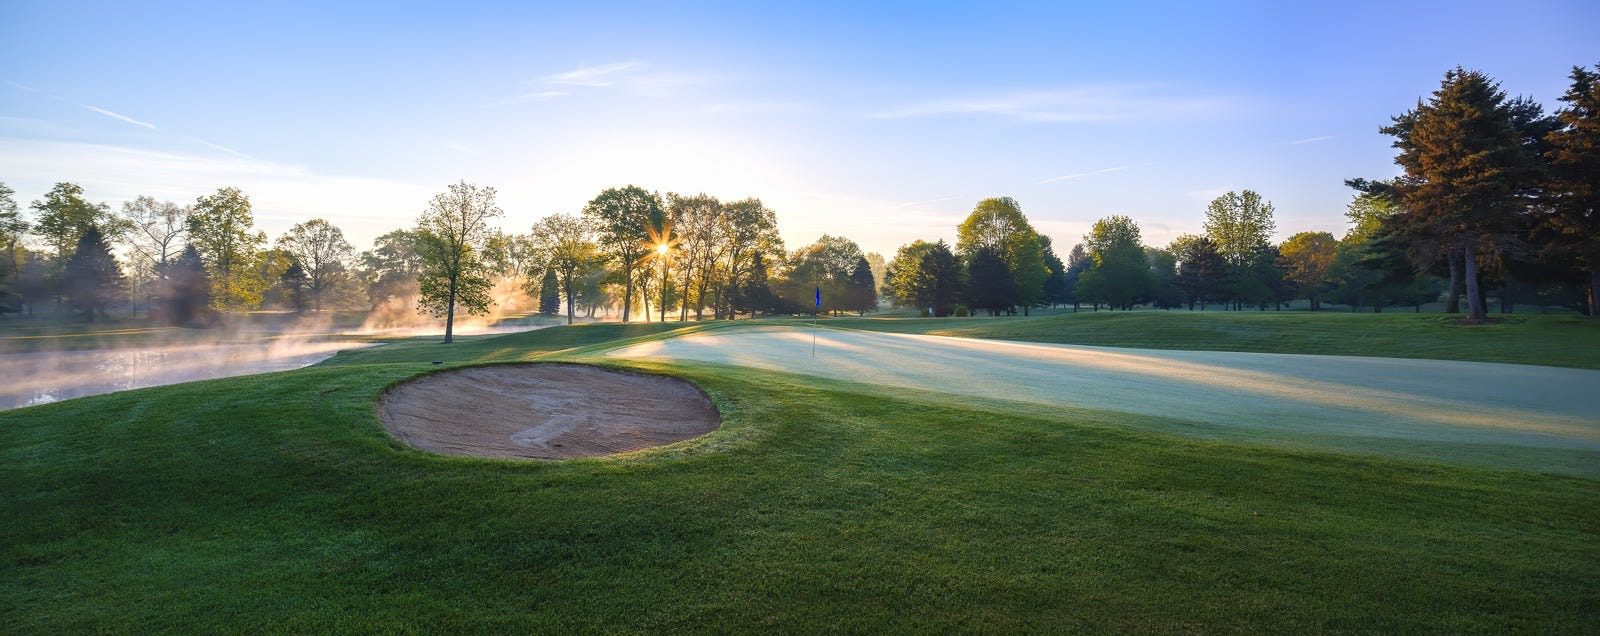 Ohio course carved into pieces during auction